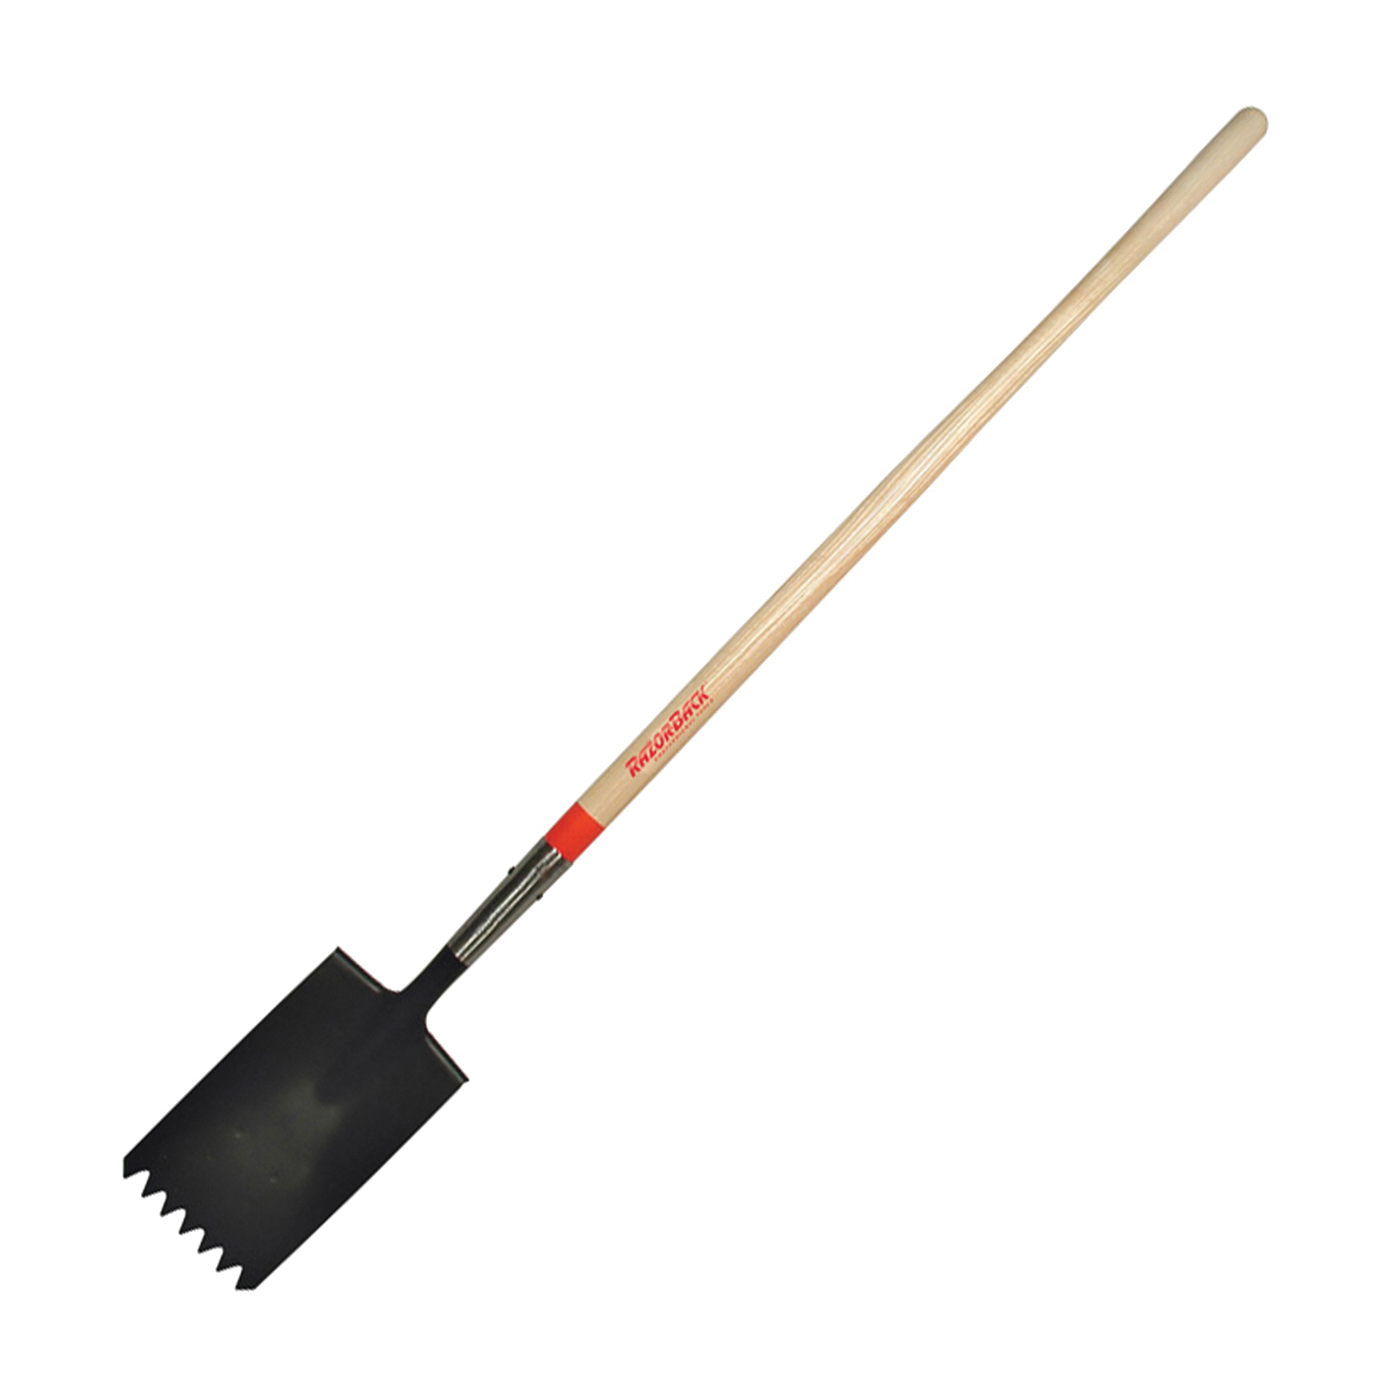 46141 Roofing Tool with Shingle Remover, Steel Blade, Hardwood Handle, 60-1/4 in OAL